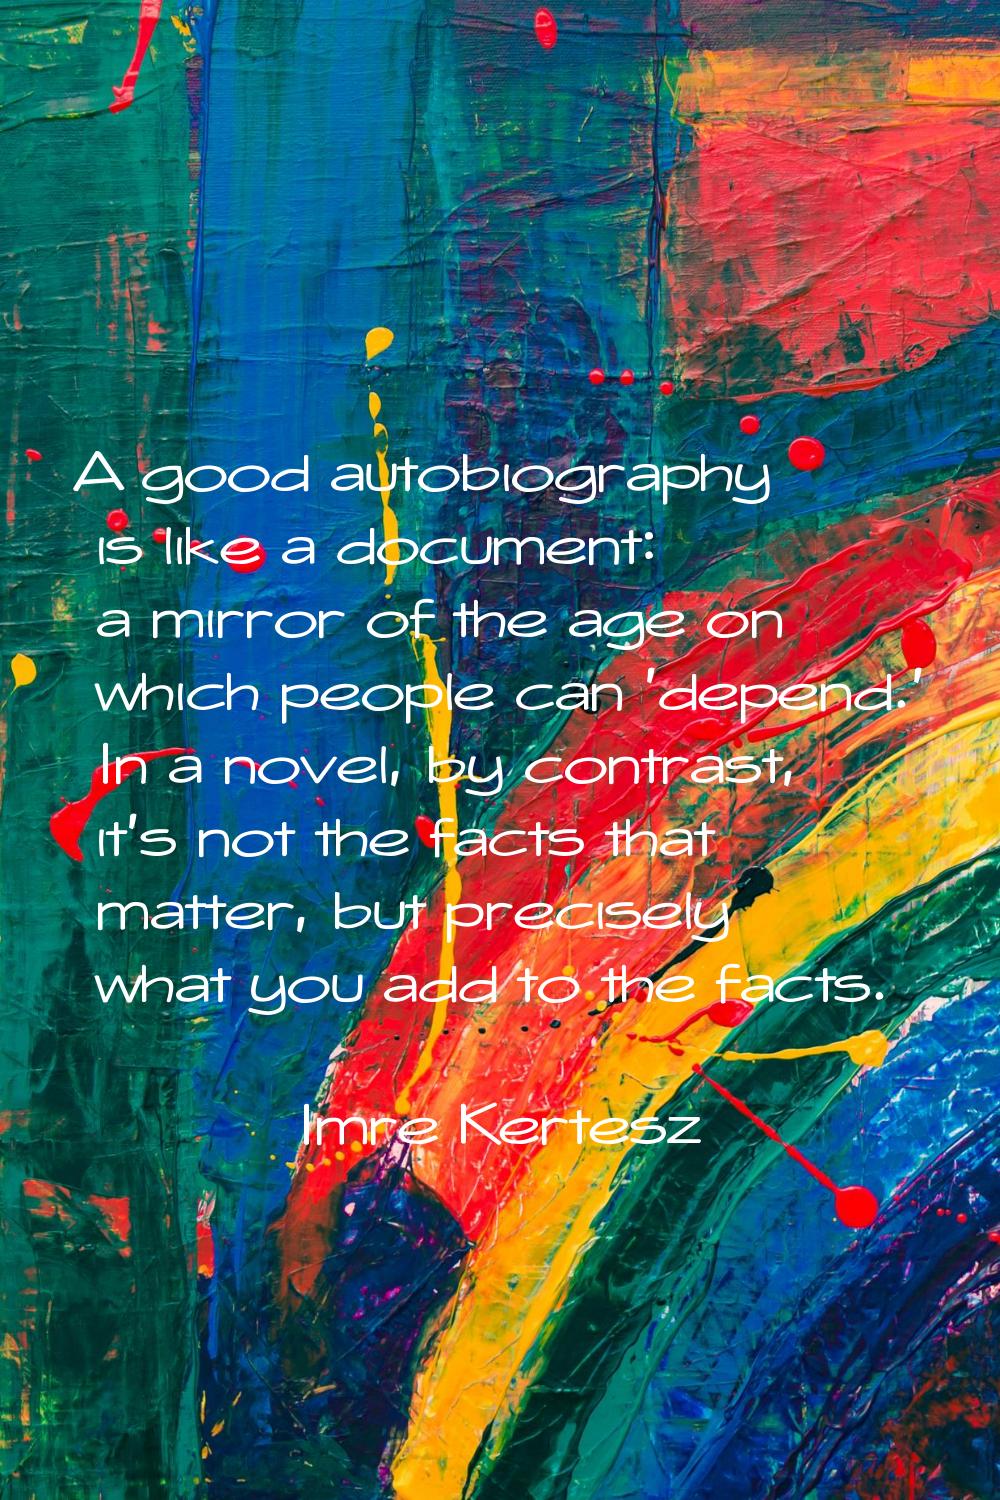 A good autobiography is like a document: a mirror of the age on which people can 'depend.' In a nov